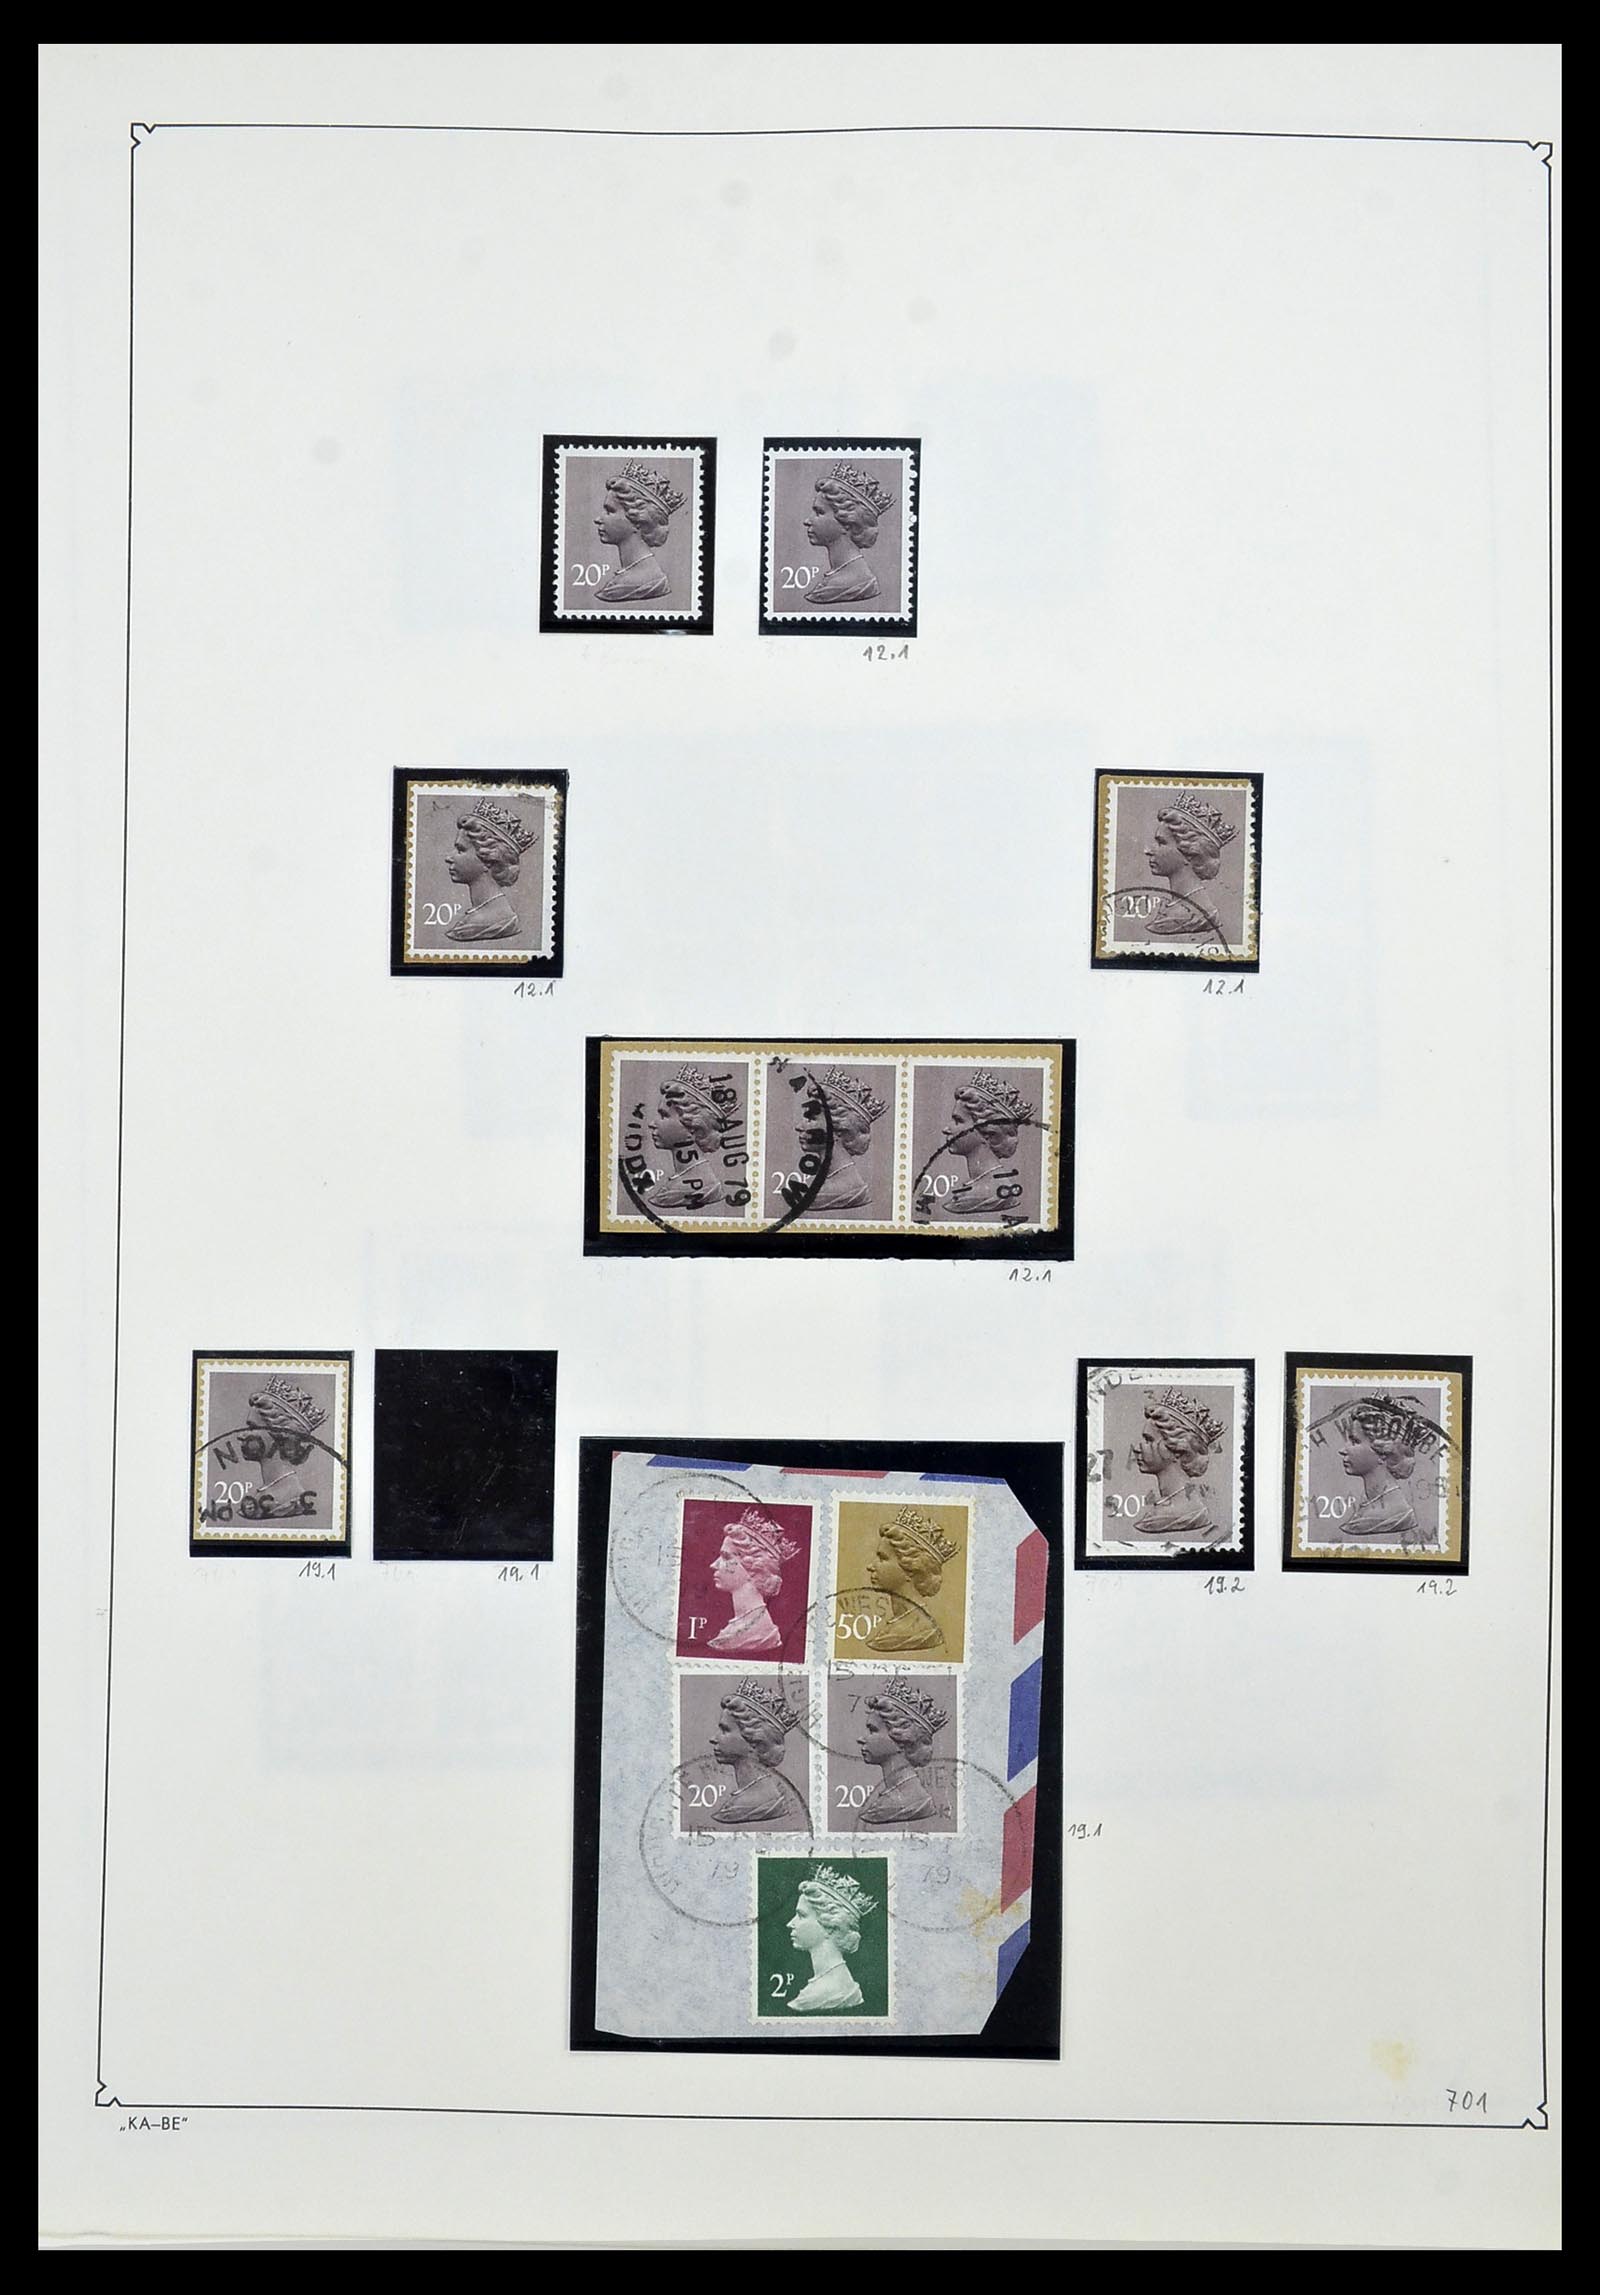 34221 088 - Stamp collection 34221 Great Britain Machins/castles 1971-2005.